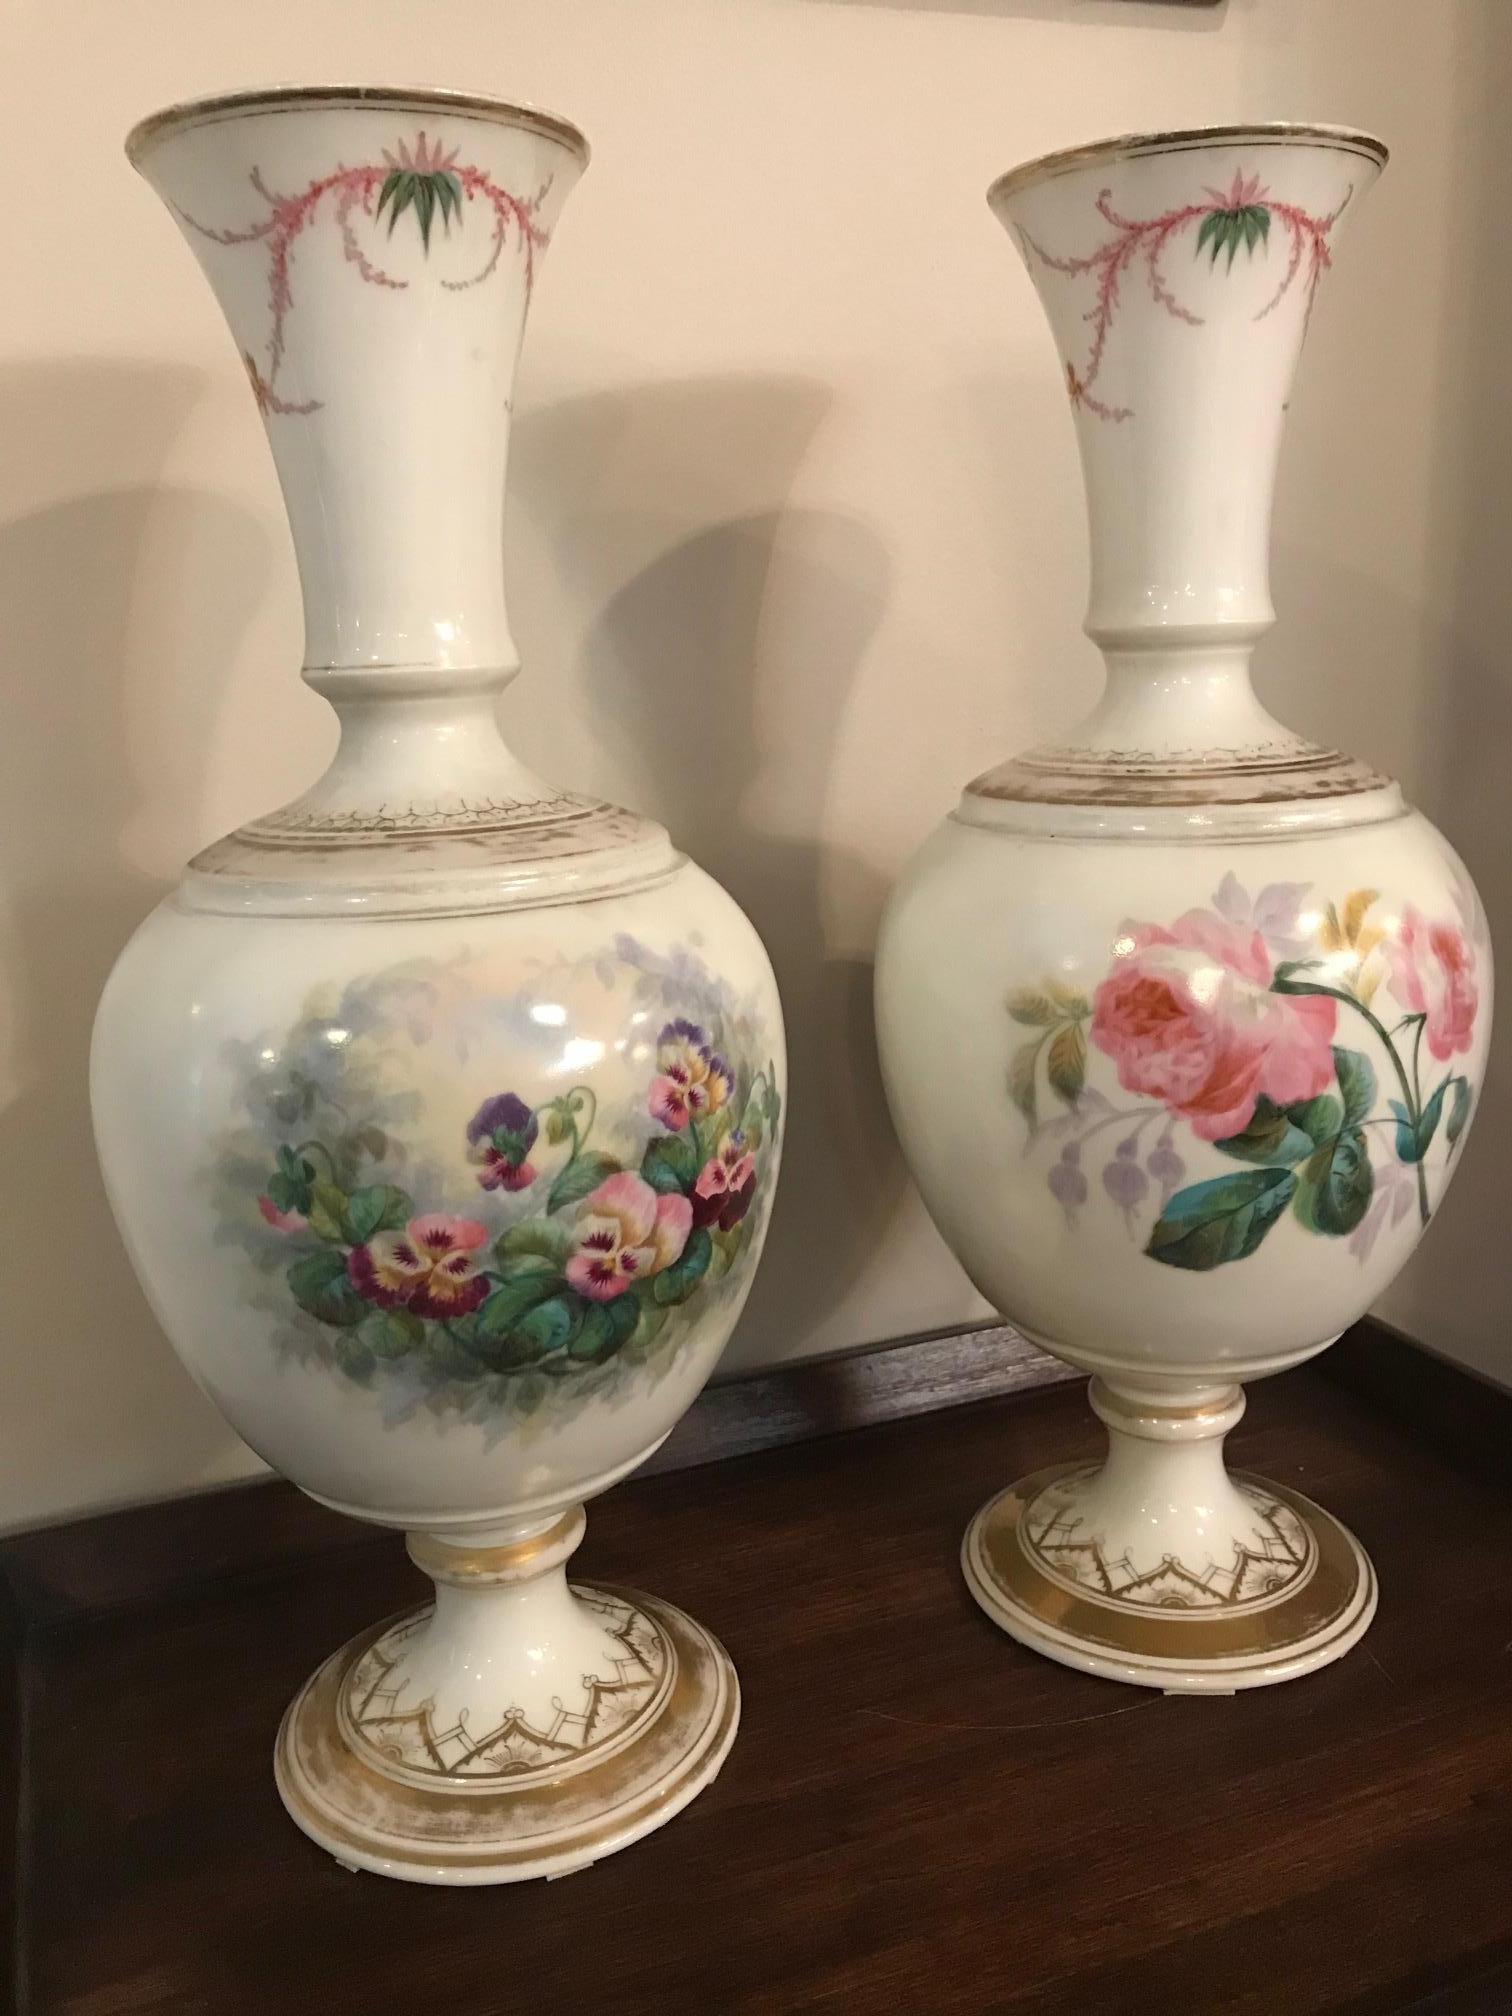 Porcelain 19th Century French Flowers Decoration Pair of Vases, 1850s For Sale